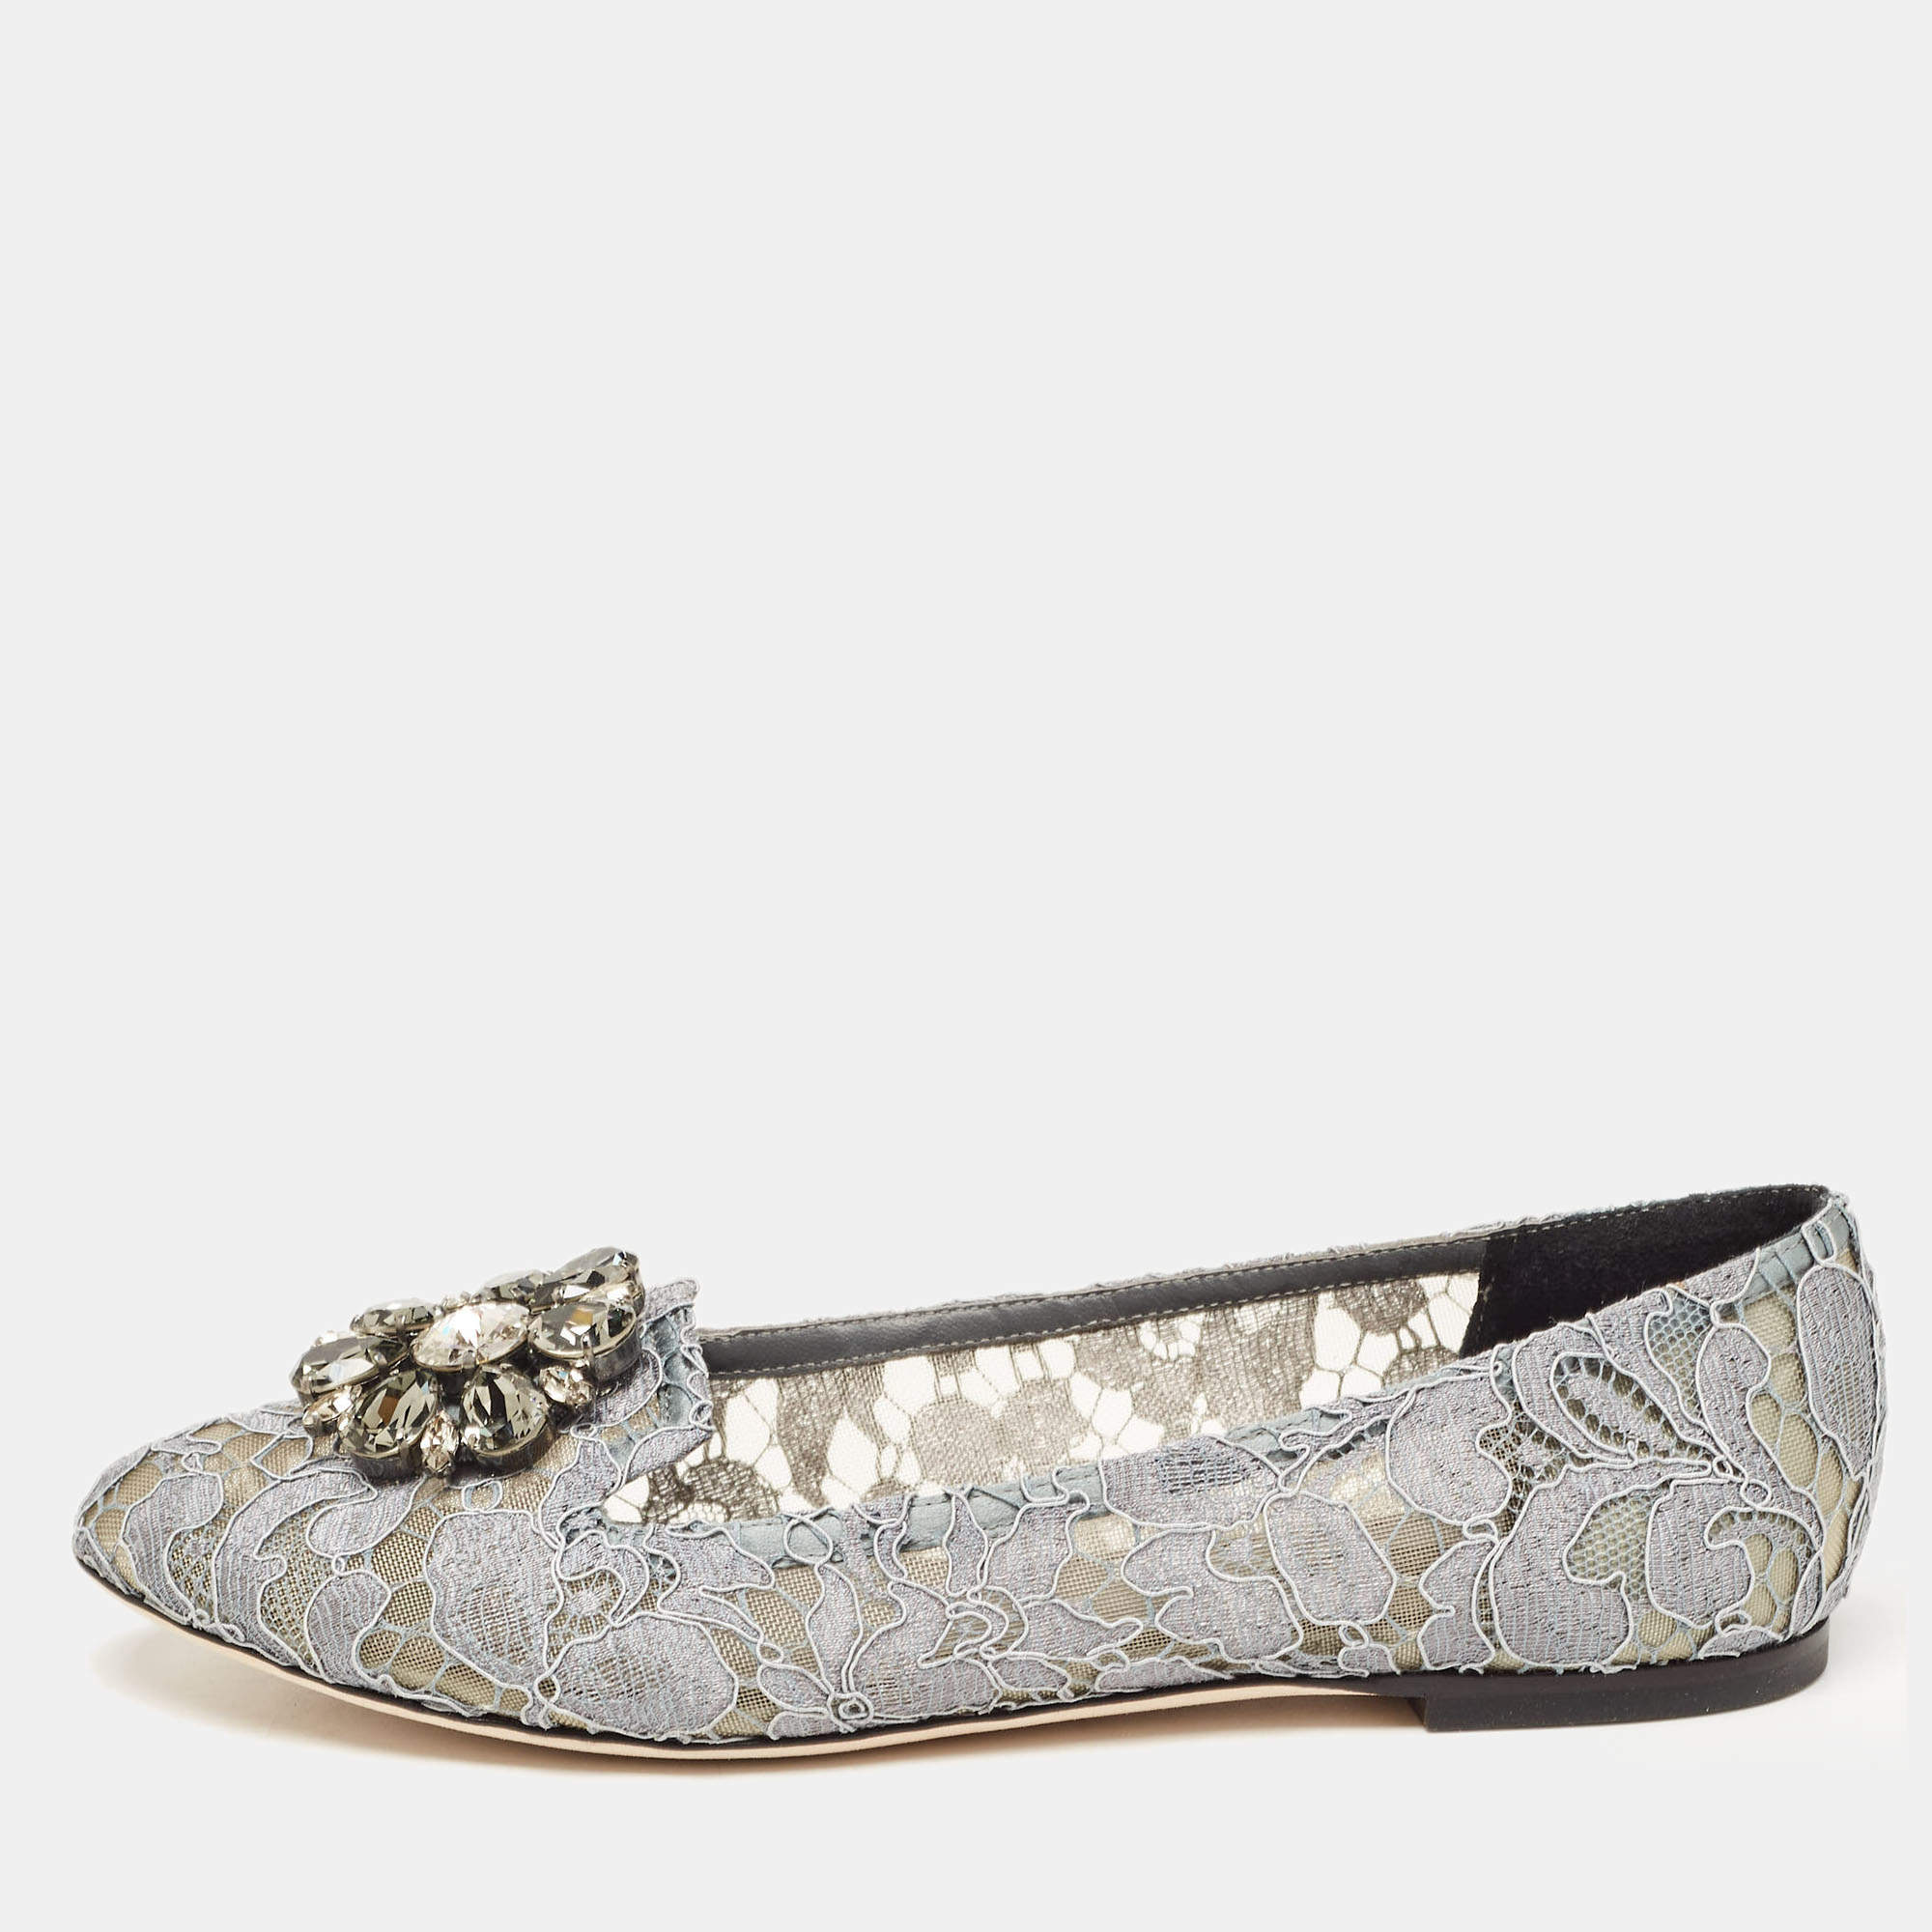 Dolce & Gabbana Grey Lace and Mesh Bellucci Crystal Embellished Ballet Flats Size 38.5